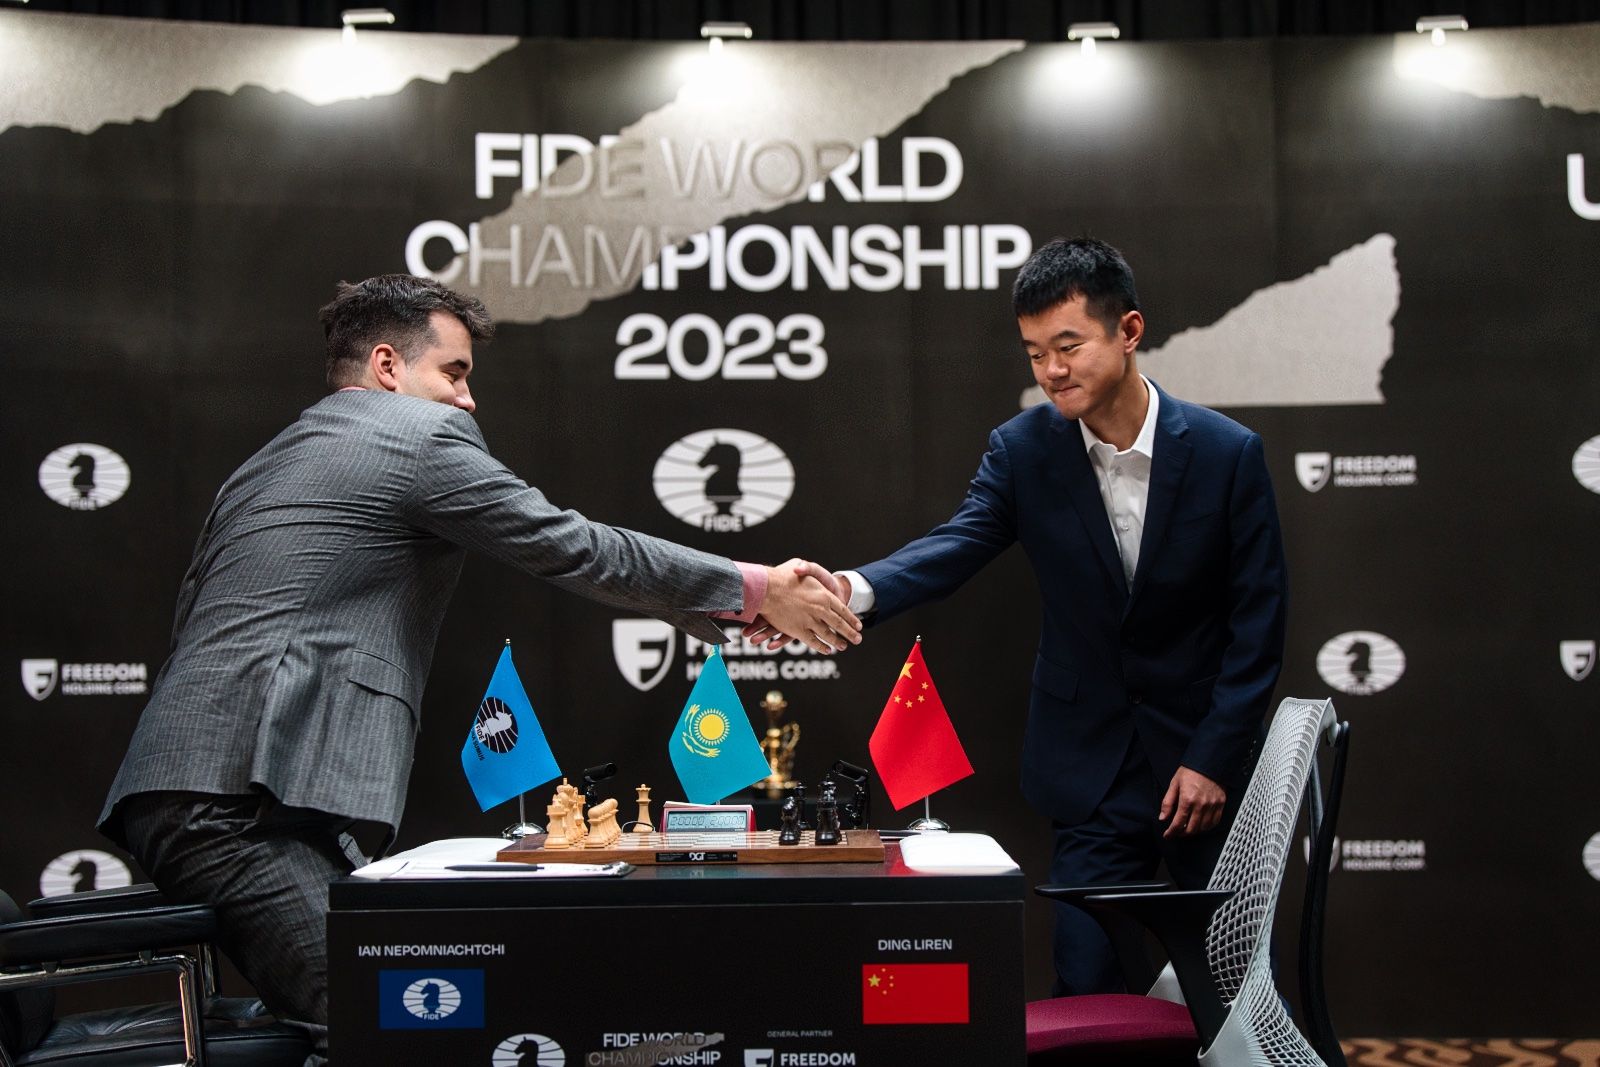 Ian Nepomniachtchi Discusses The World Championship, Intuition